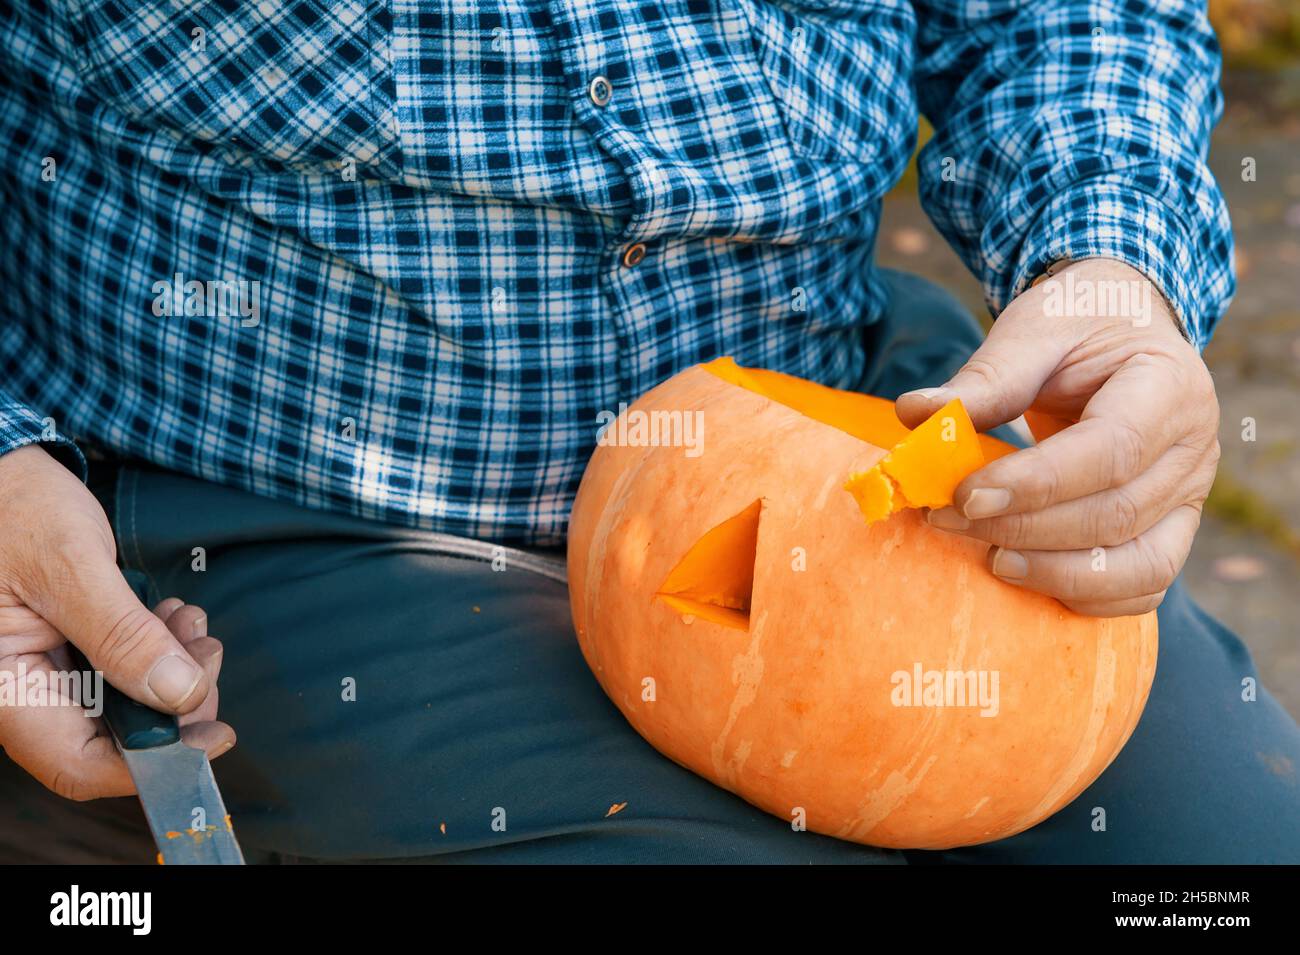 old man cuts holes in a pumpkin . a man is sitting on a bench in the garden and cooking a pumpkin for the Halloween holiday. Stock Photo